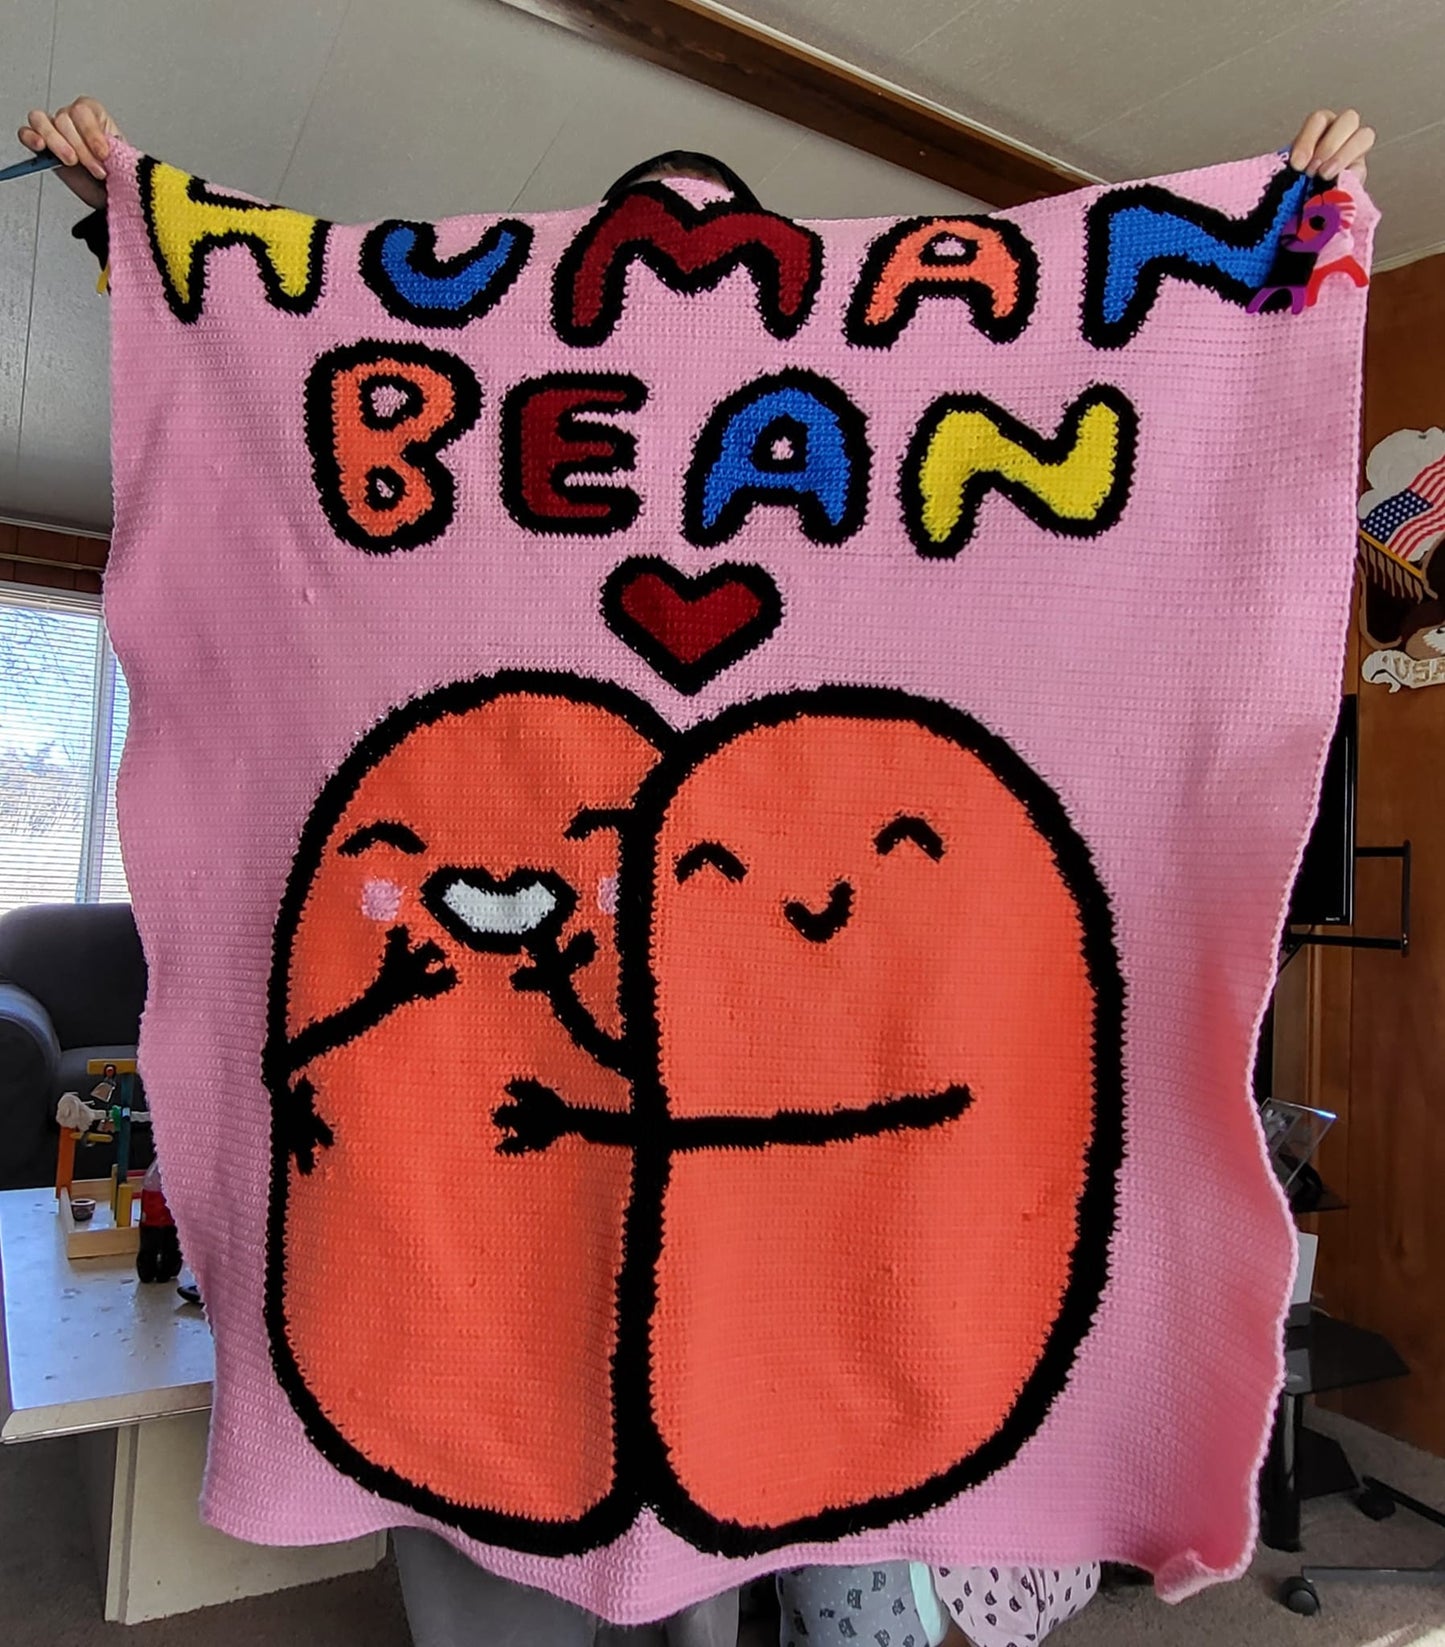 You Are My Favorite Human Bean Crochet Graphghan Pattern